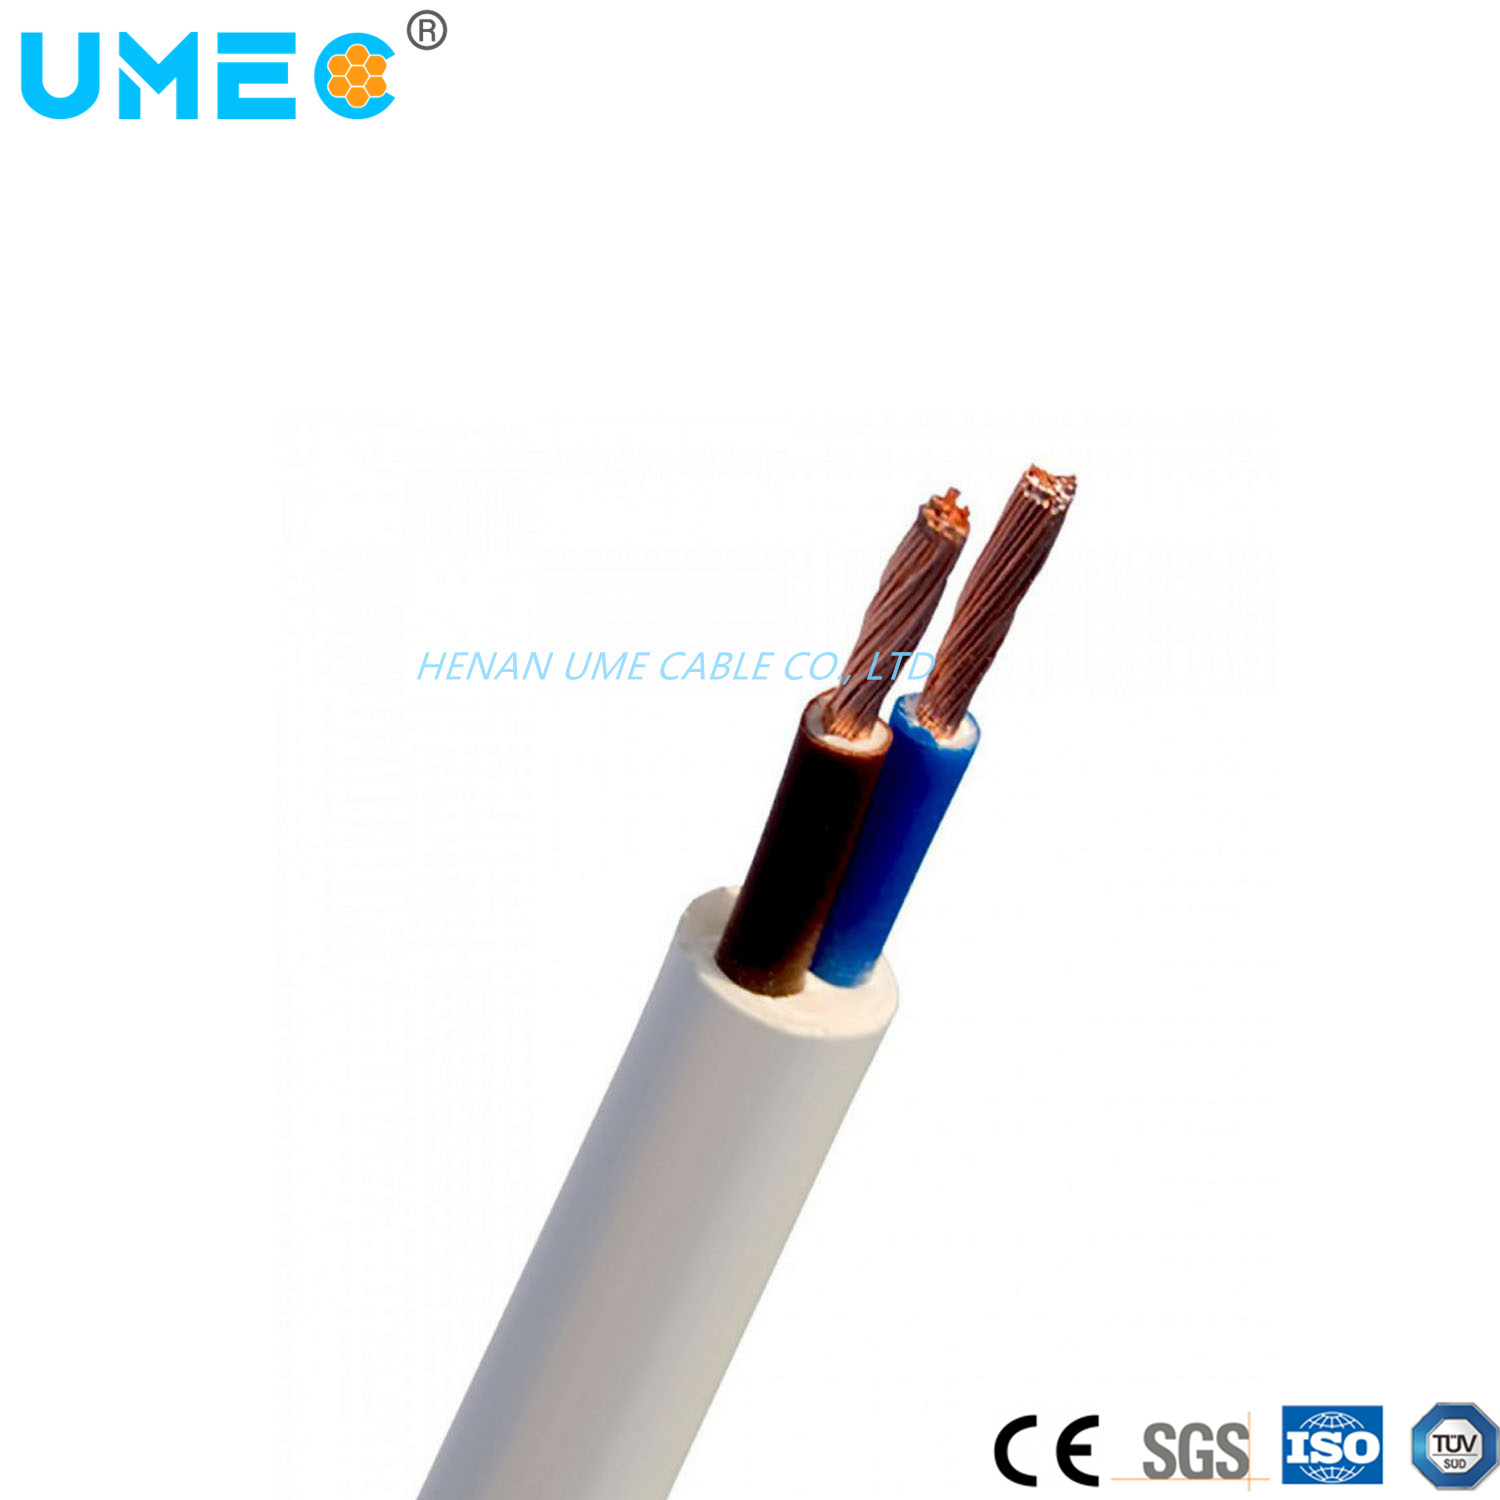 
                300/500V Myym Underground Cable Indoor H05VV-F A05VV-F Flame Retardant Rvv Copper Cord Cable
            